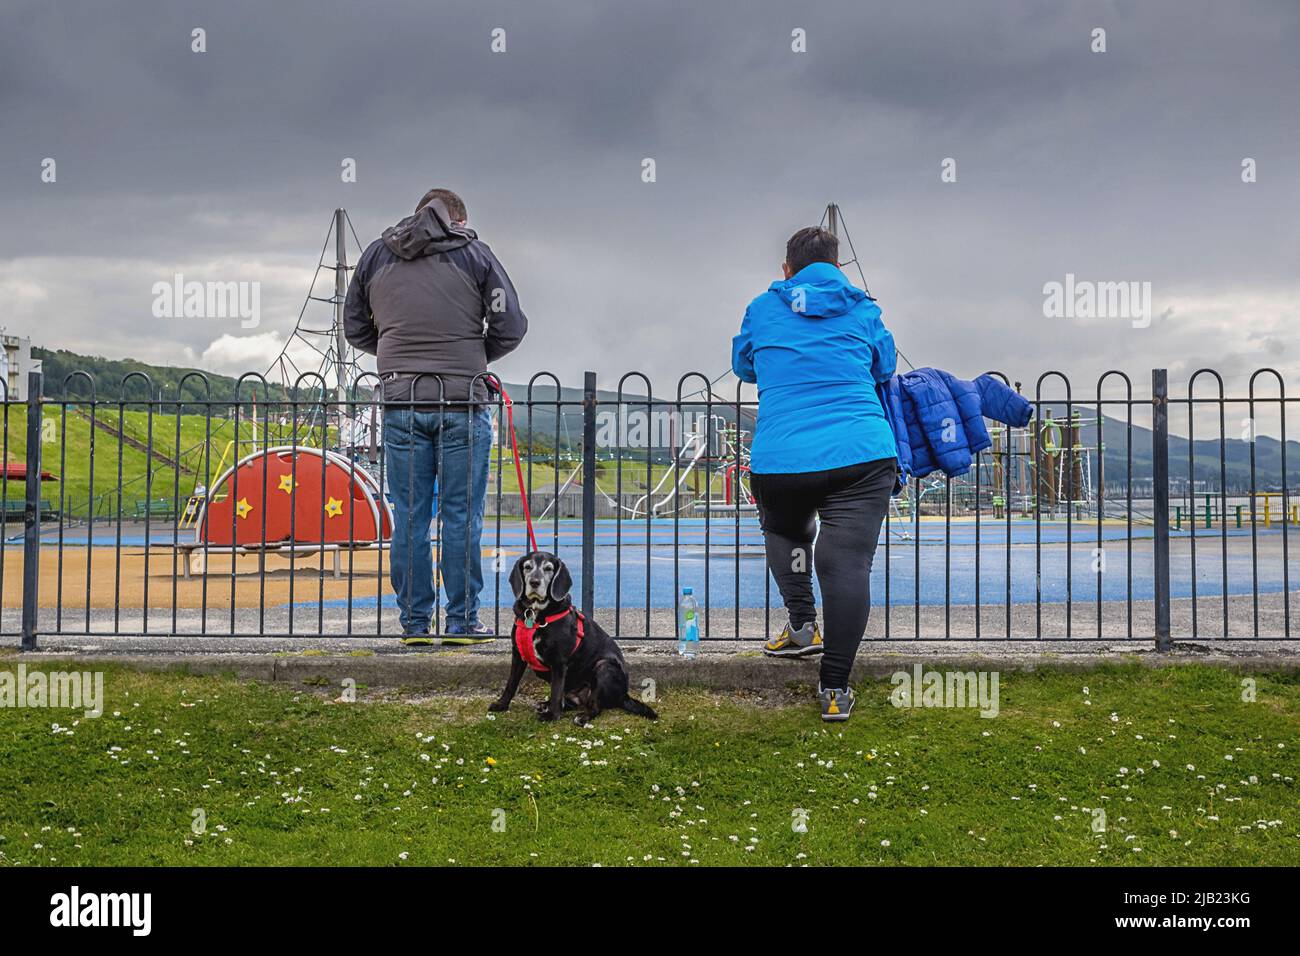 Waiting for the off. Dog waiting the humans to move so that he can continue it's walk Stock Photo